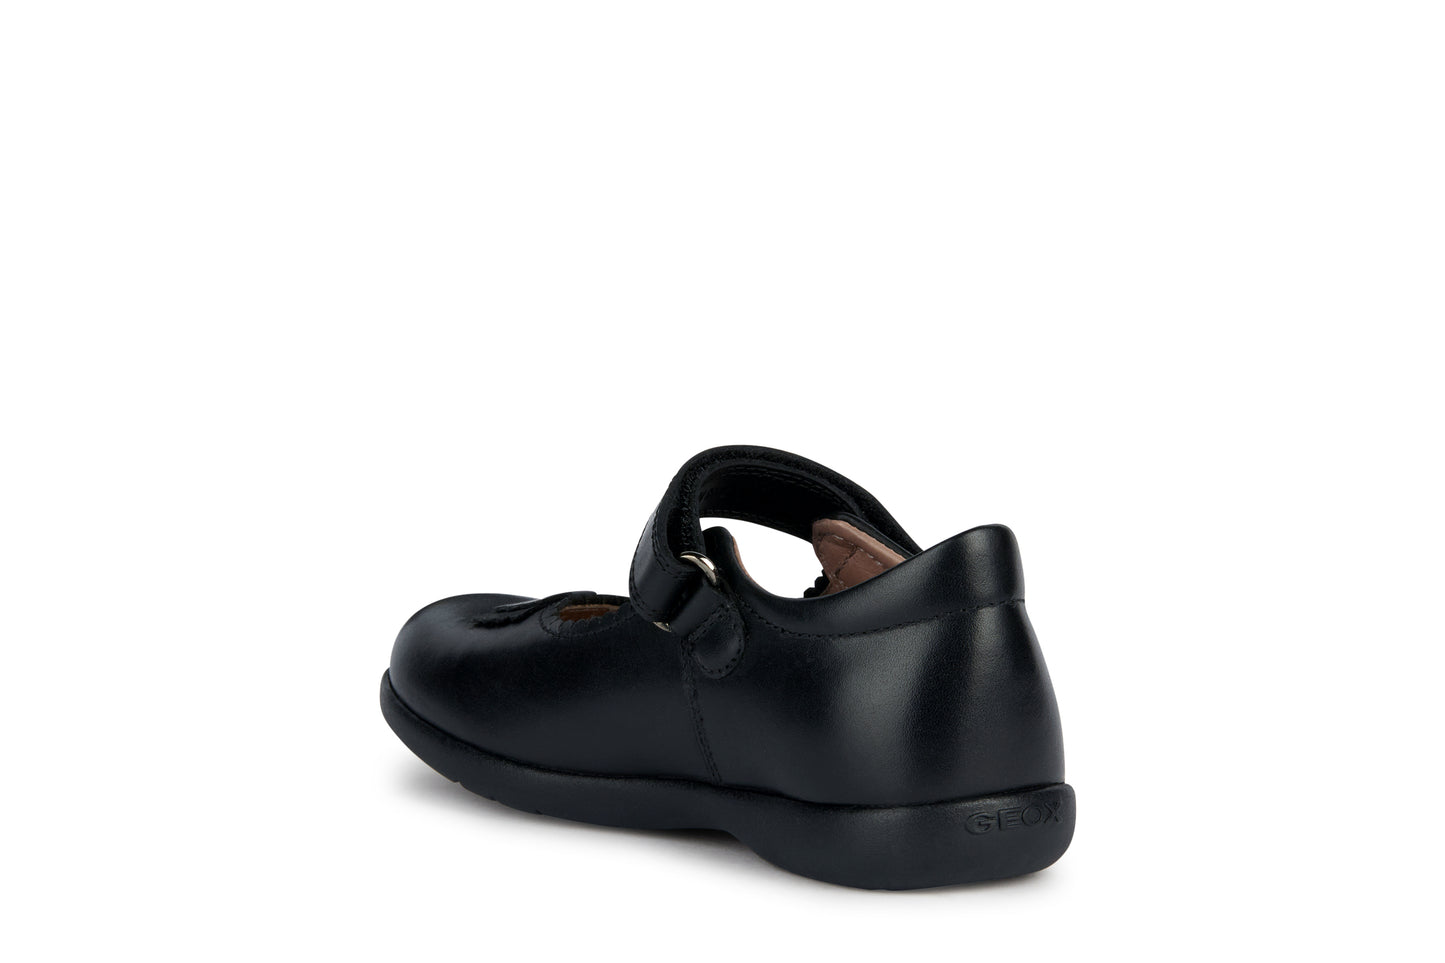 A girls school shoe by Geox, style Naimara in black with a velcro strap. Inner side rear view.